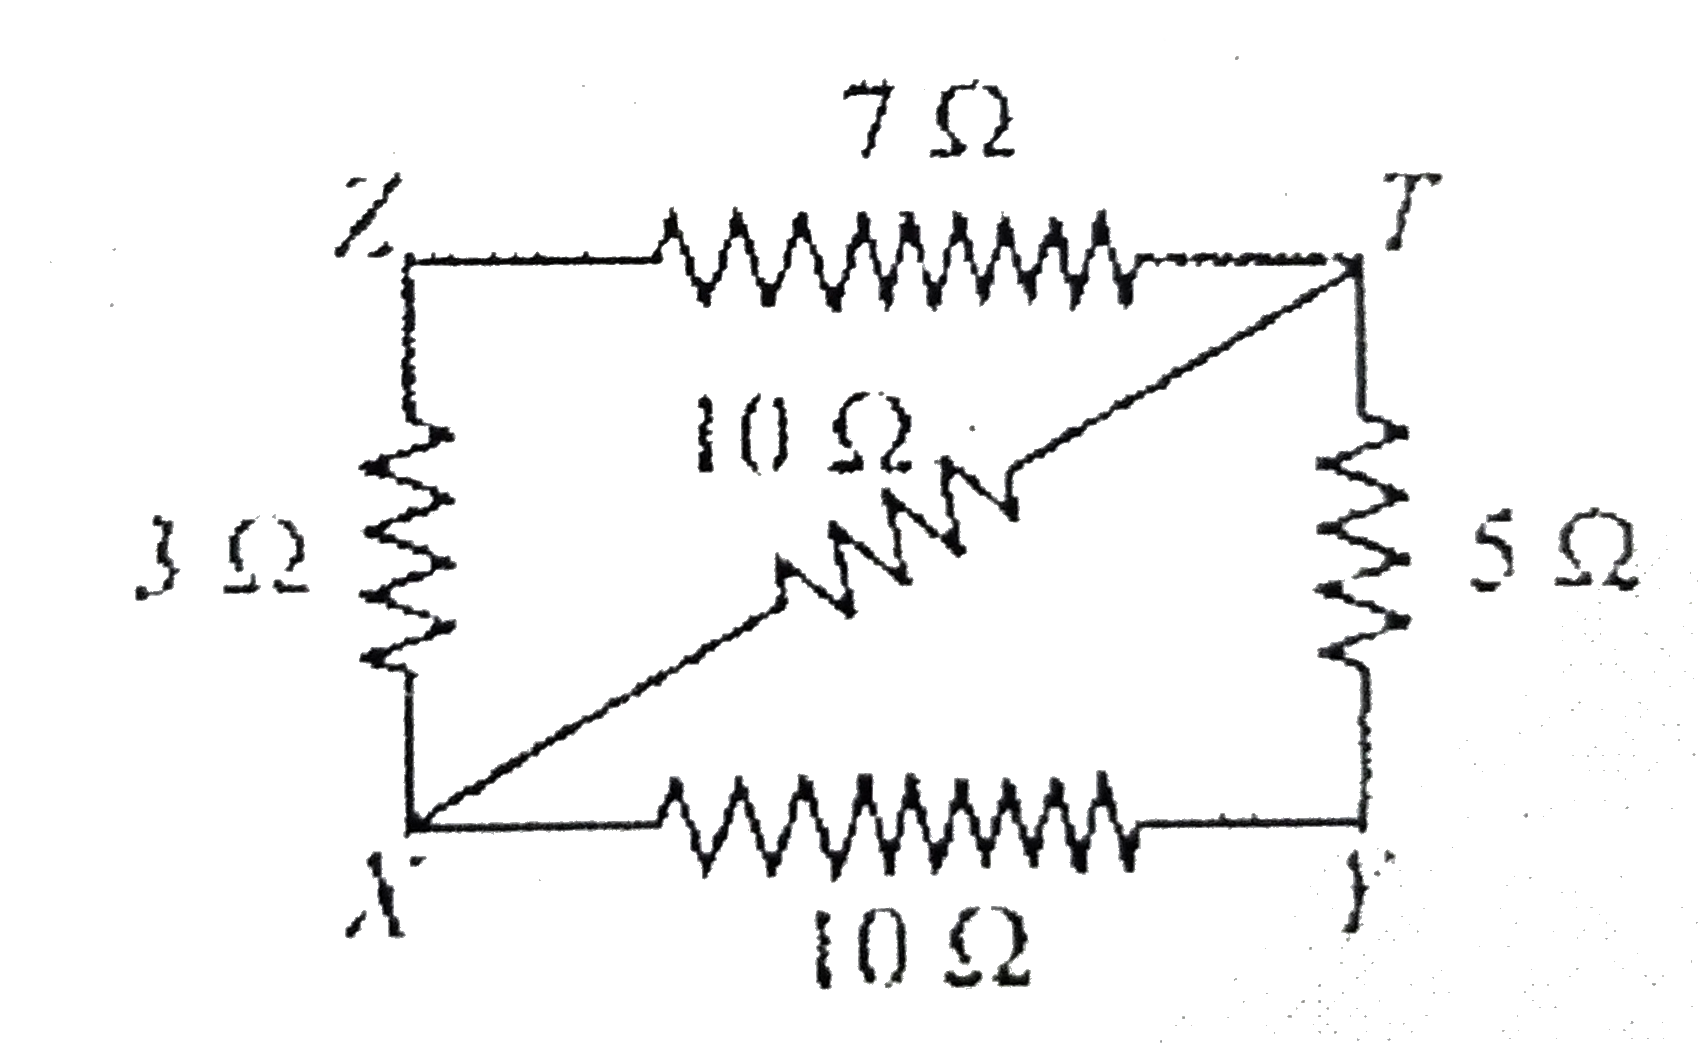 The equivalent resistance between the point X and Y in the following circuit diagram will be